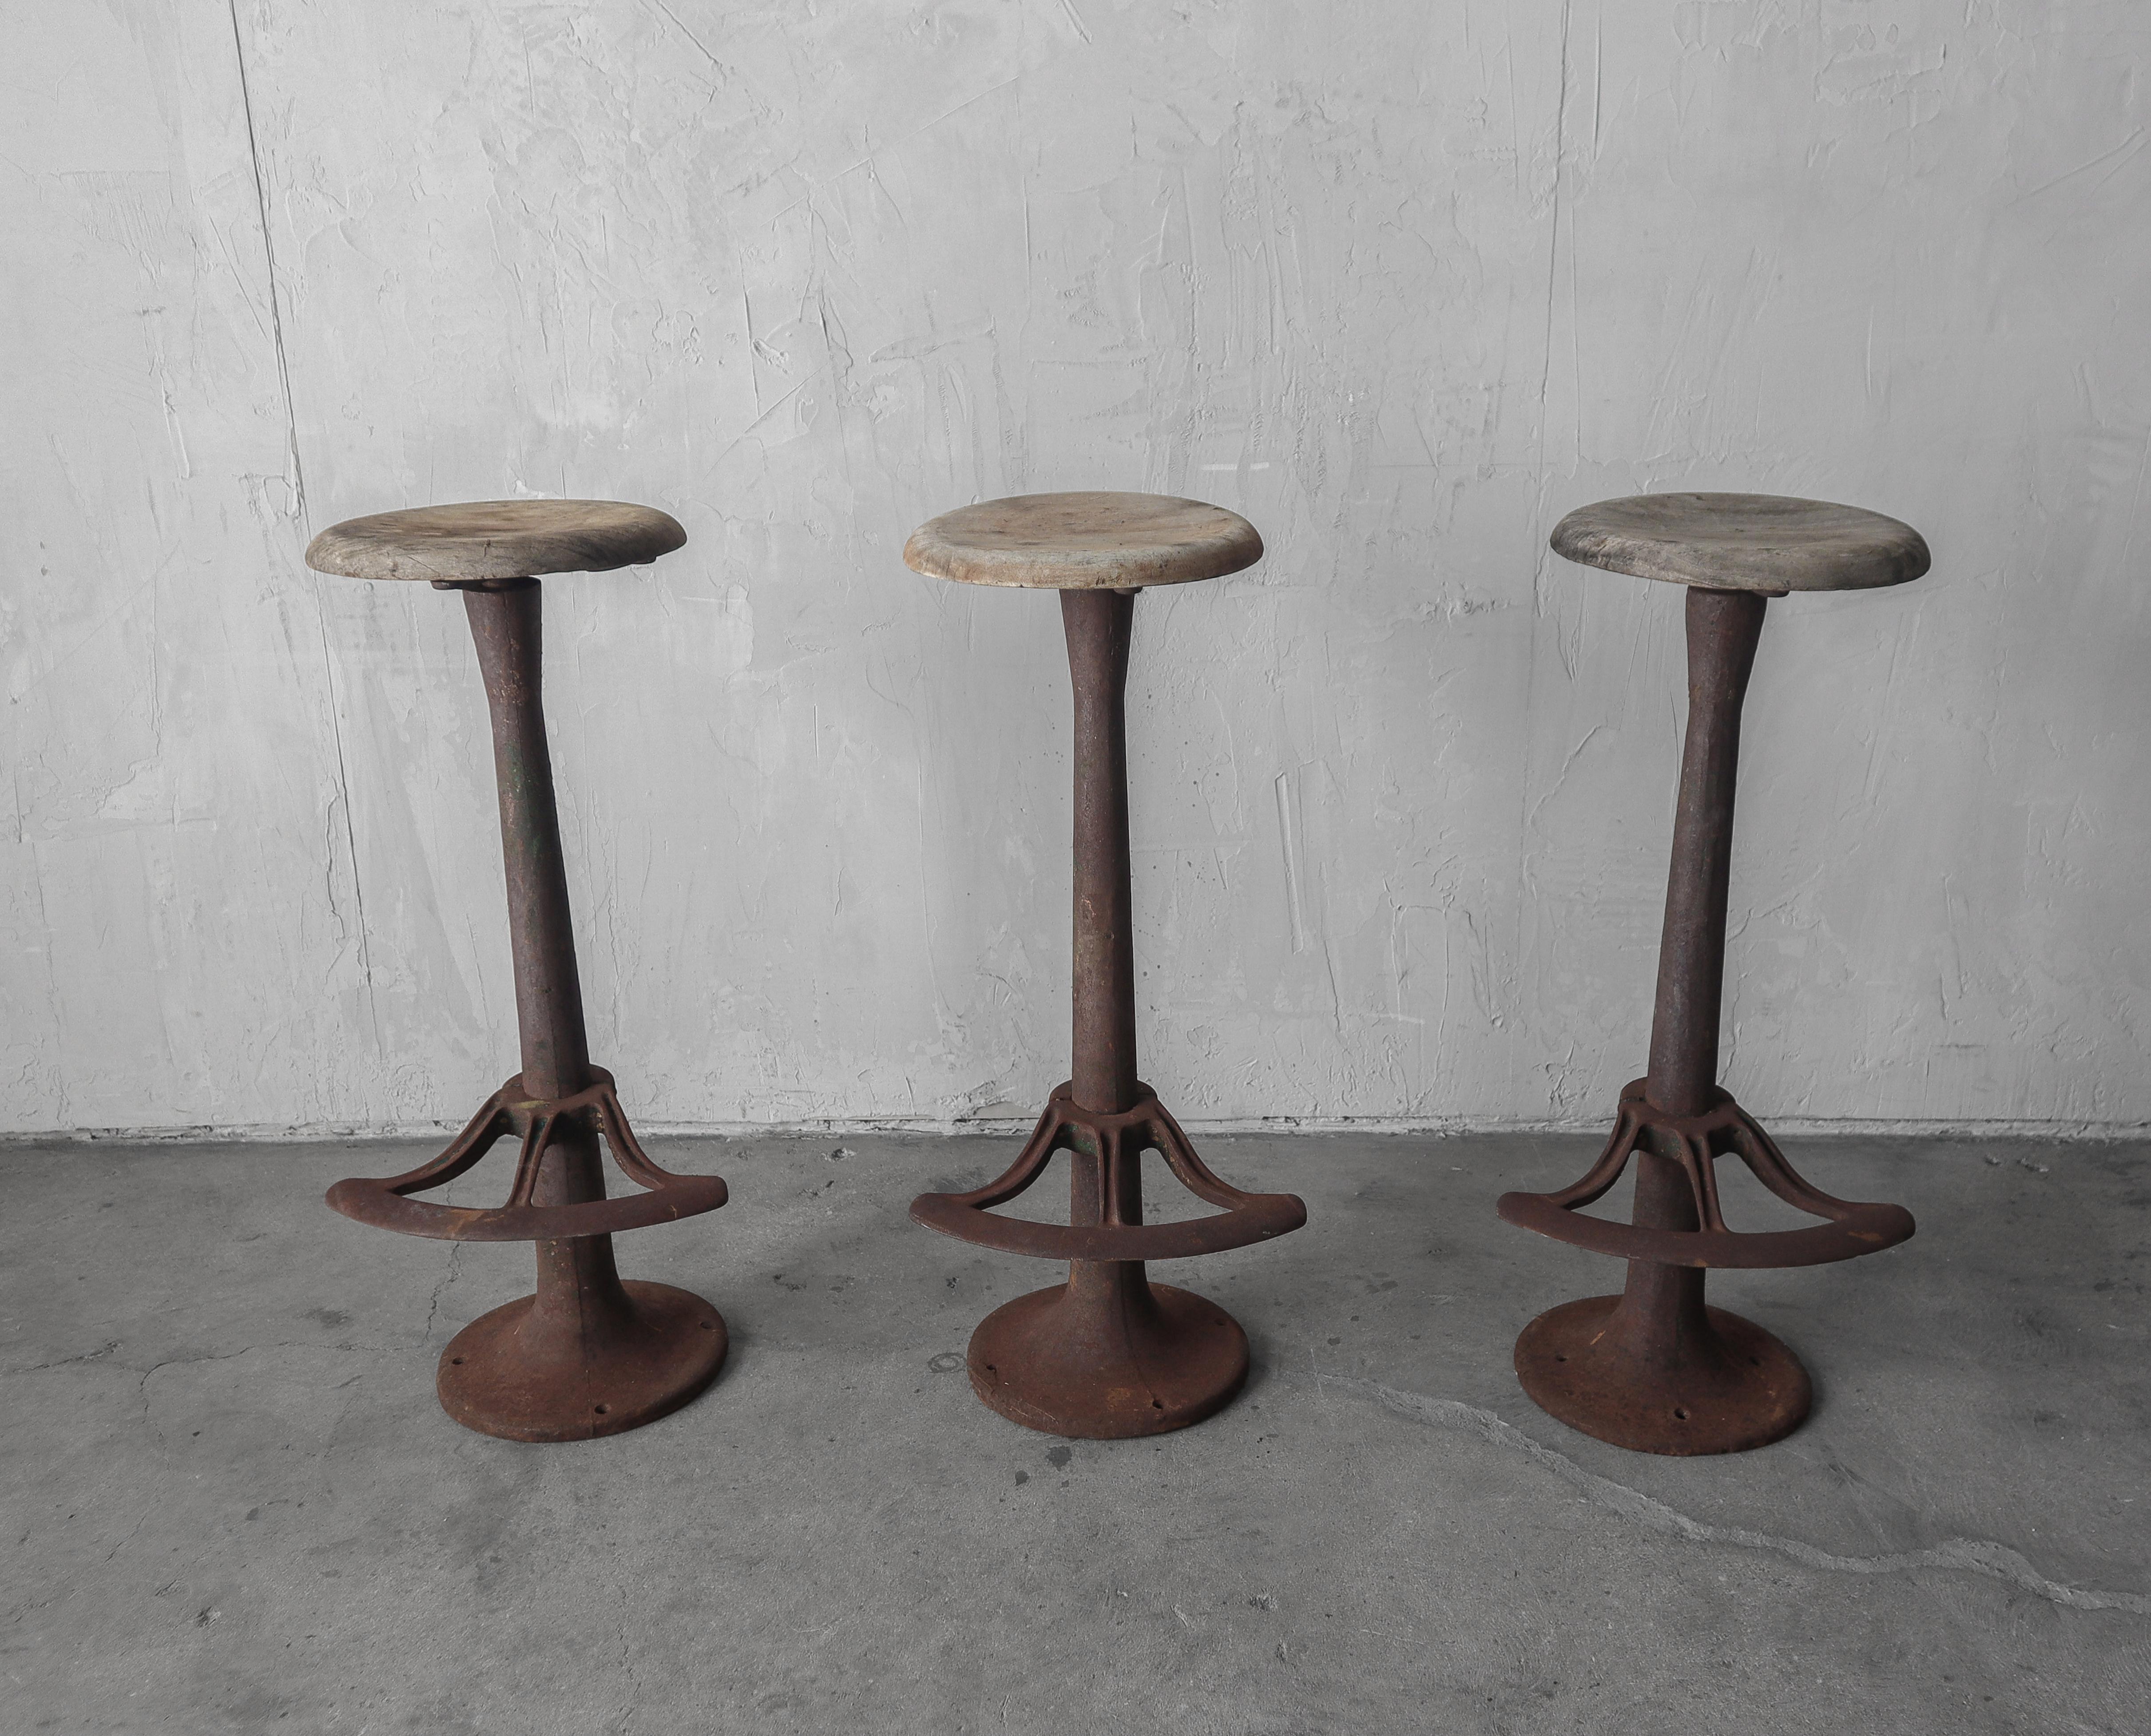 These stools were a barn find in Santa Barabara, California.  They have been made perfectly imperfect by time and the elements.  The handmade circular wood seats are weathered and the columns rusty, but solid, some of the original green paint still